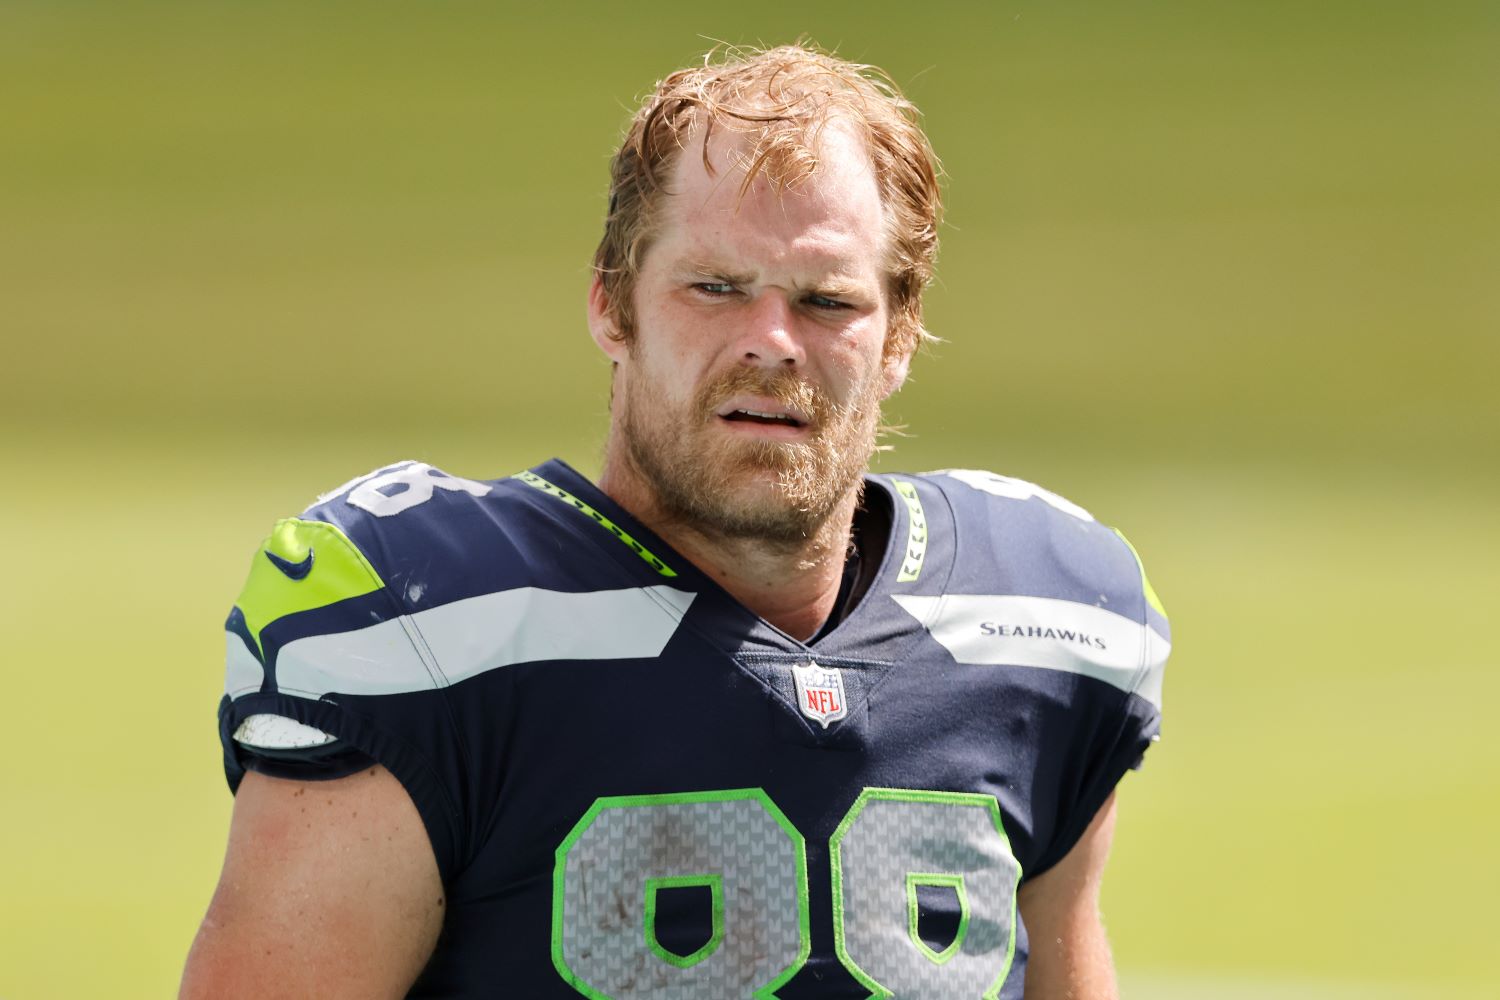 After suffering a major foot injury against the Arizona Cardinals, it looks like Seahawks TE Greg Olsen may have played his final NFL snap.